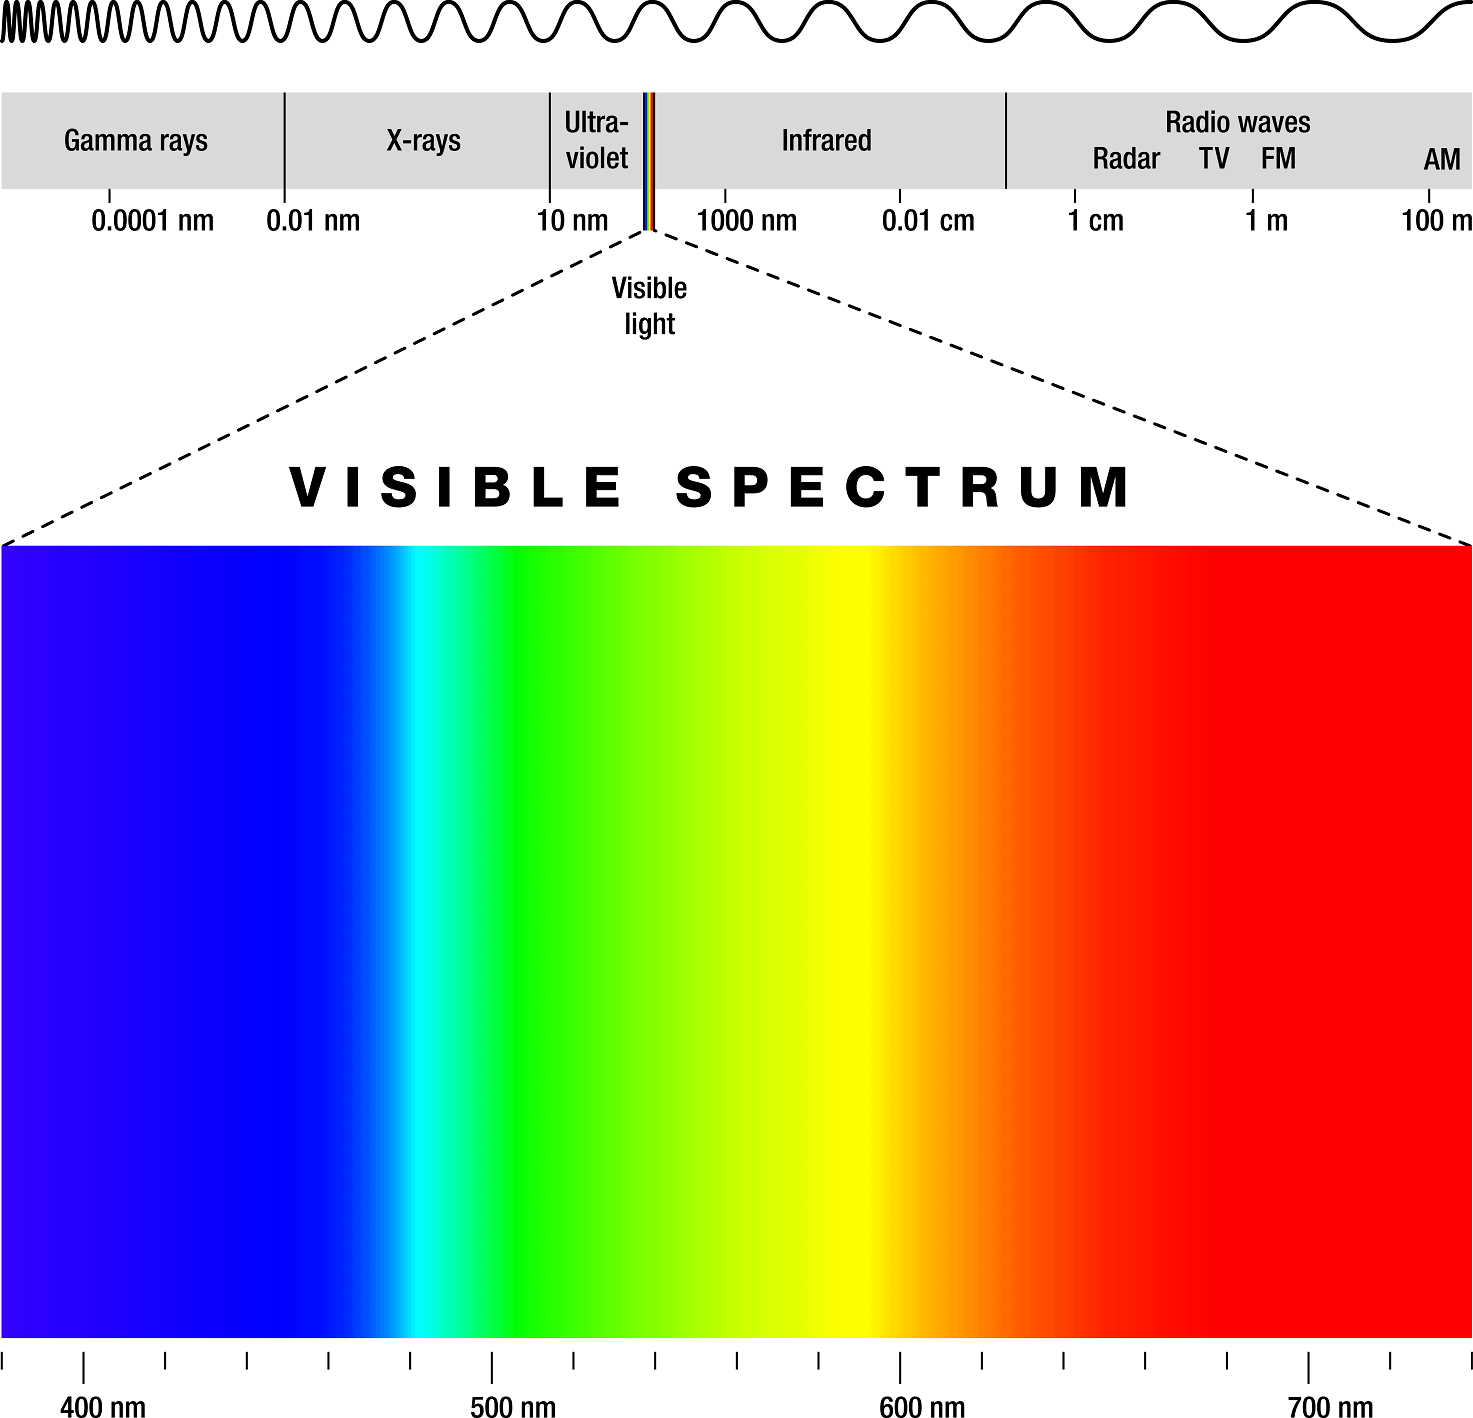 The visible color spectrum is a very small part of the electromagnetic spectrum.